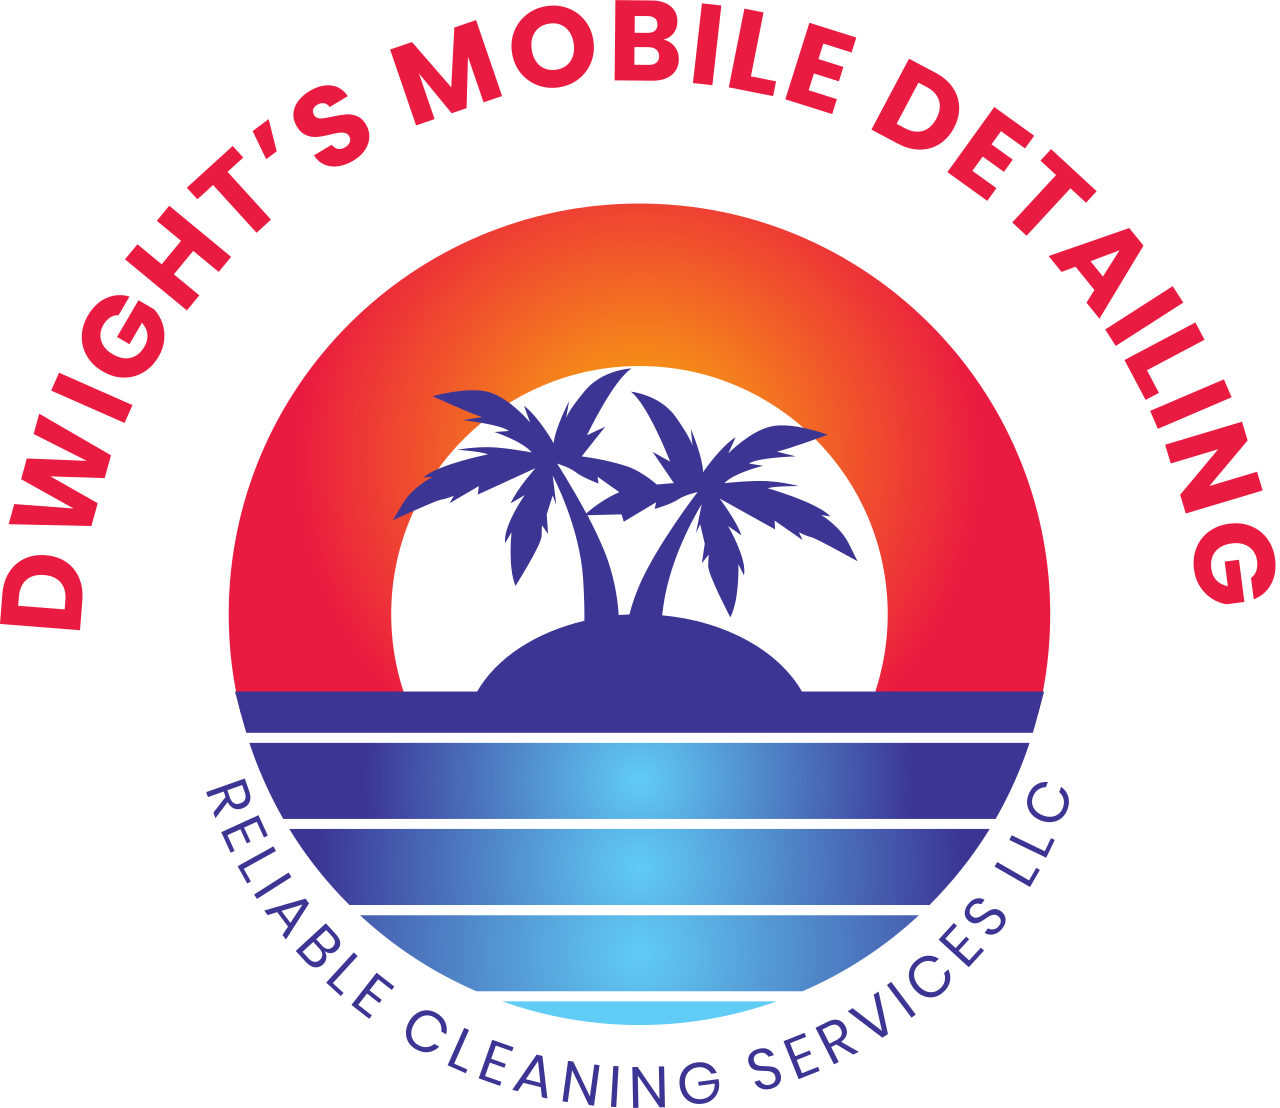 Dwight’s Mobile Detailing 's web page